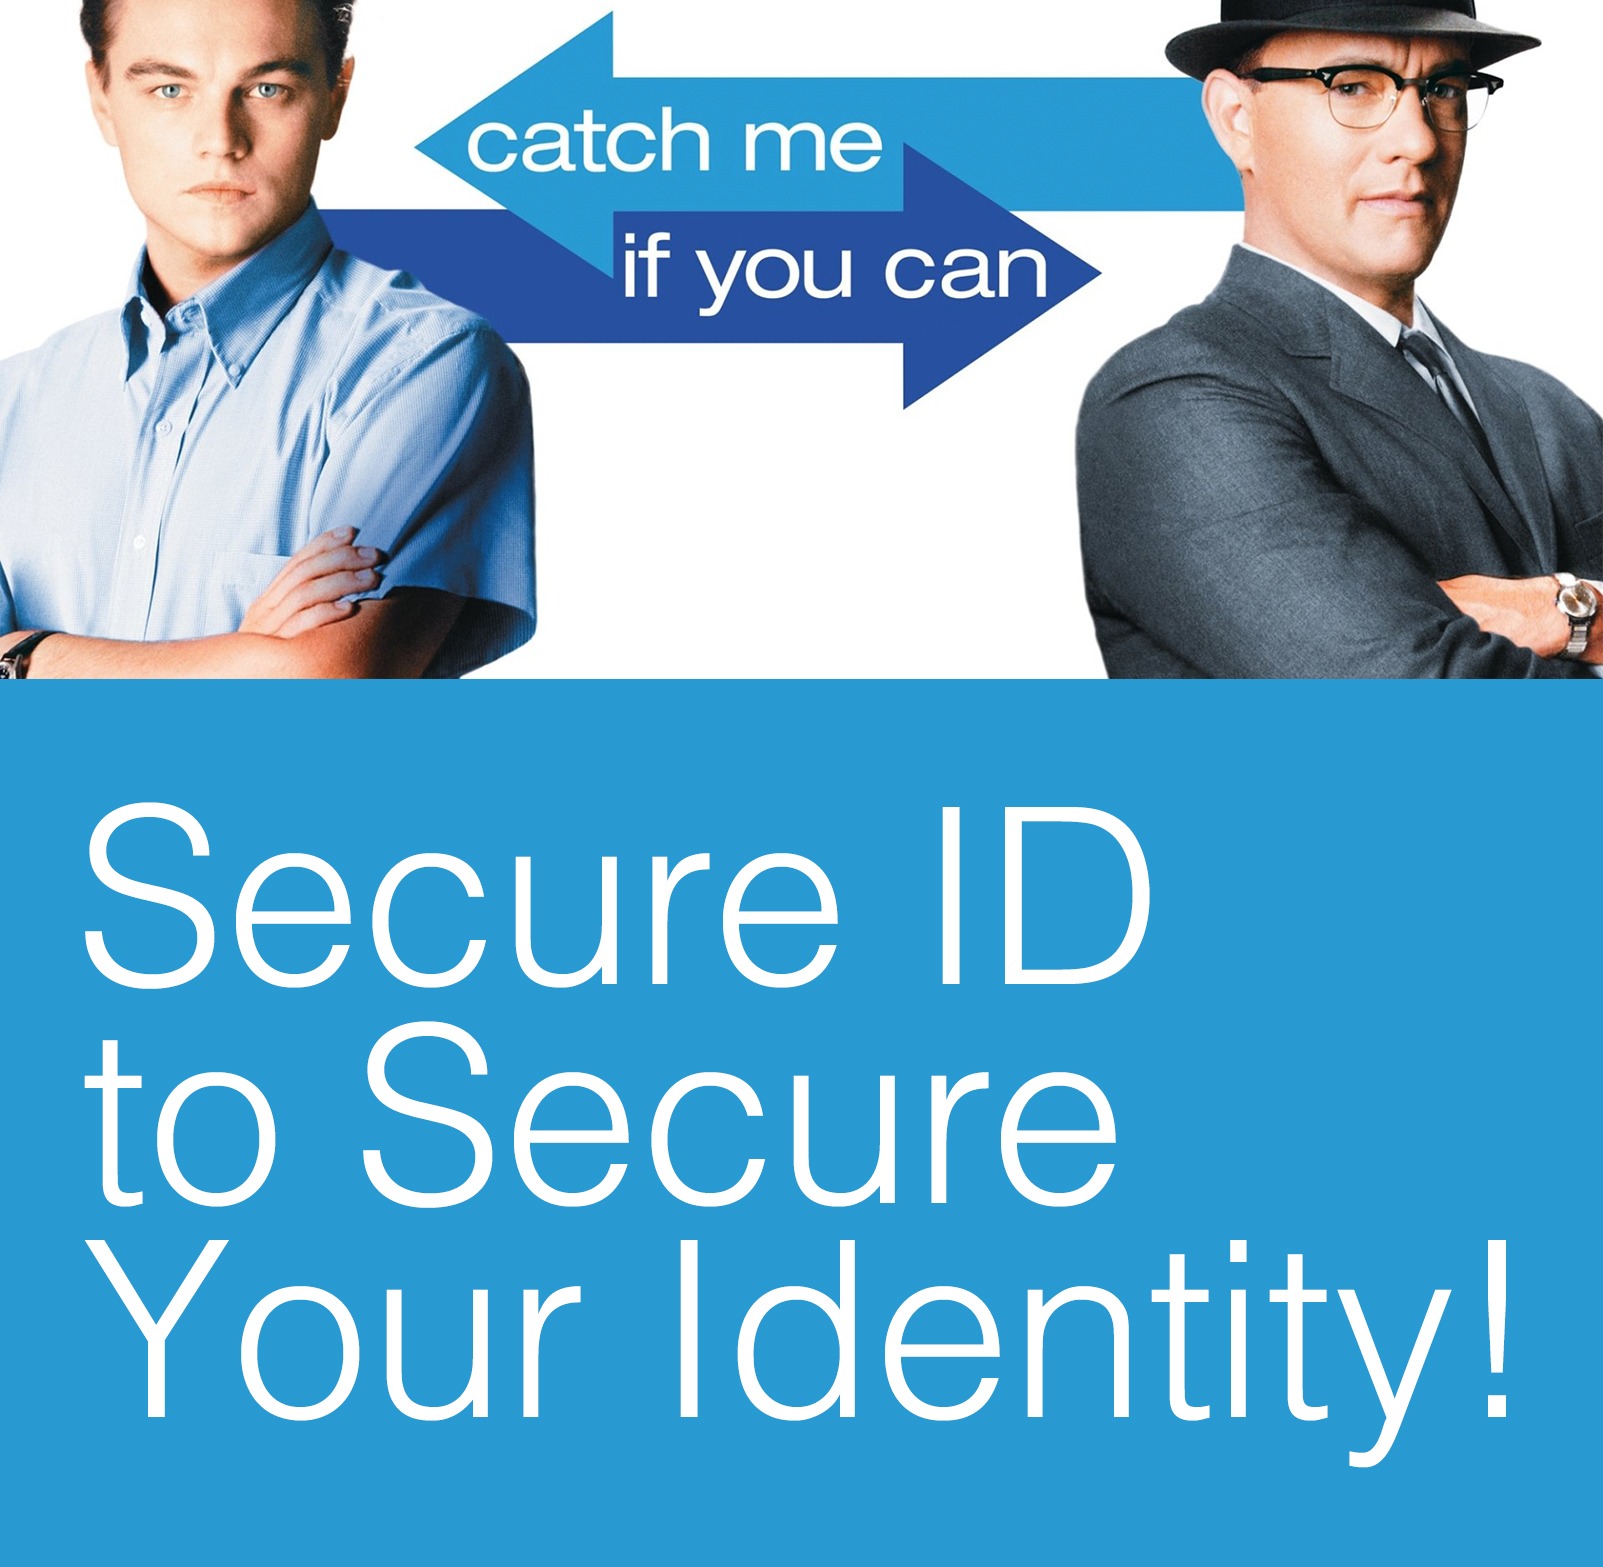 Secure ID to secure your Identity!